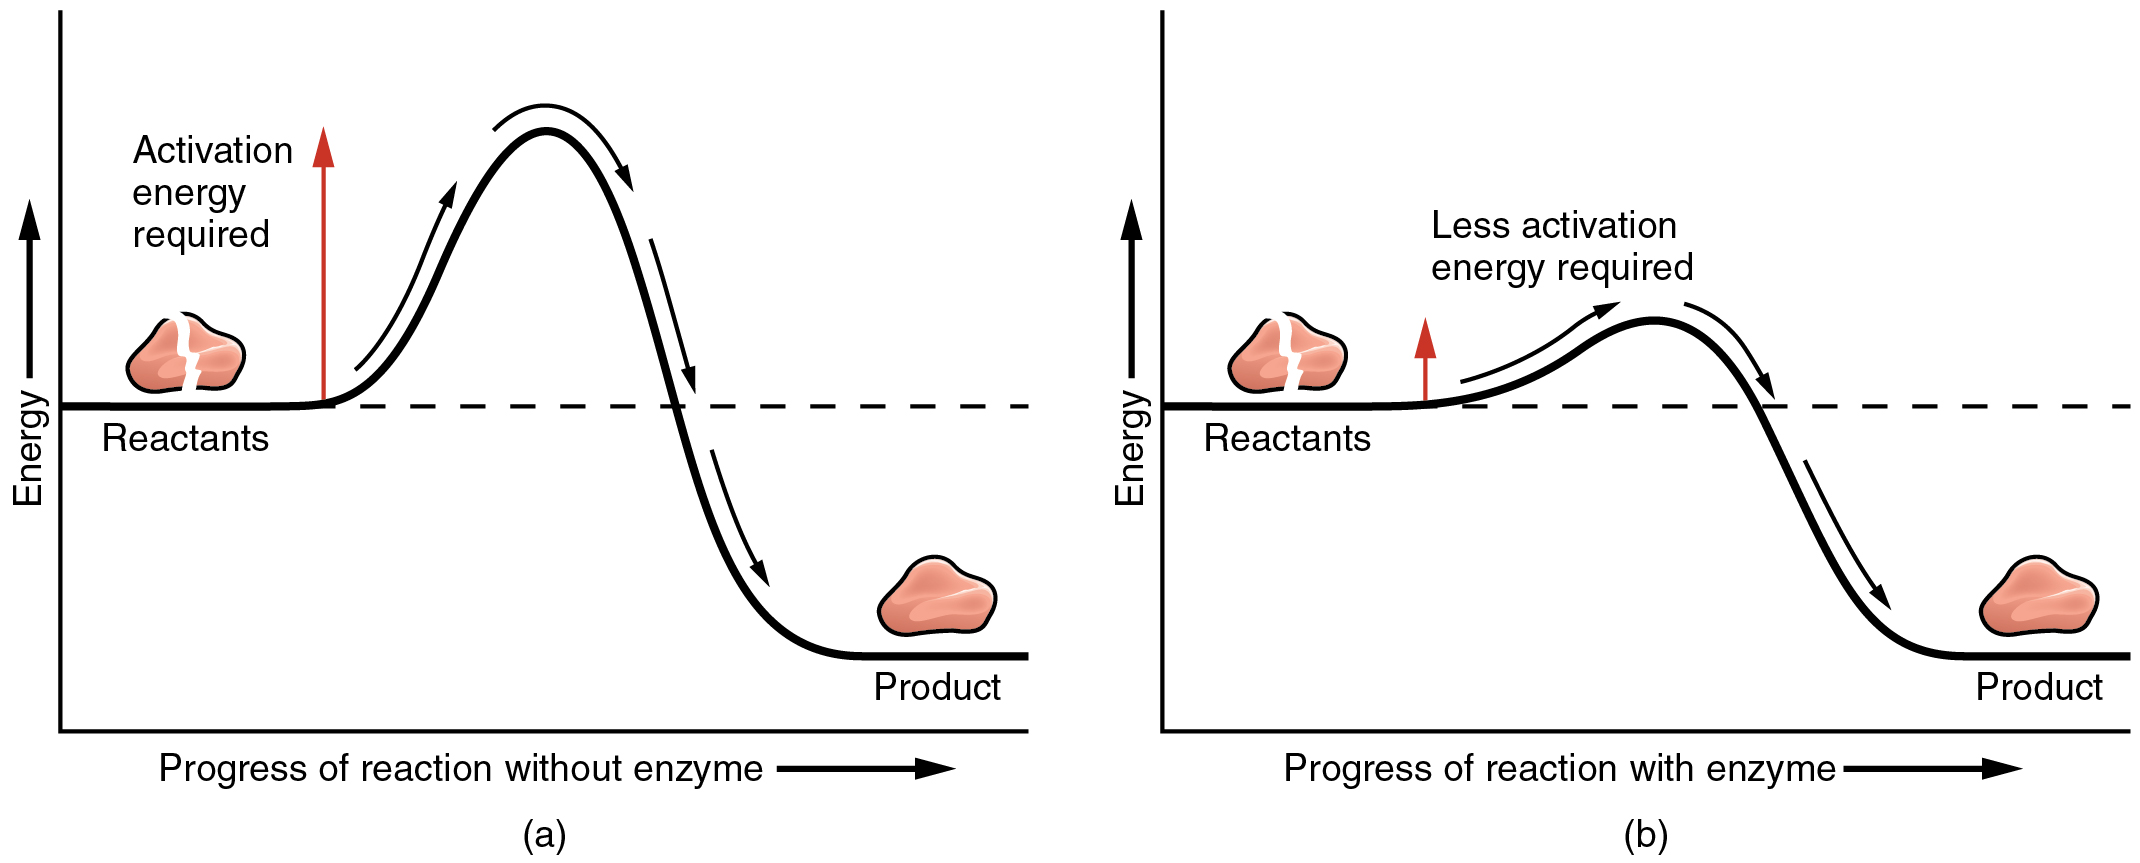 Two graphs of the relationship of enzymes and activation energy in a chemical reaction